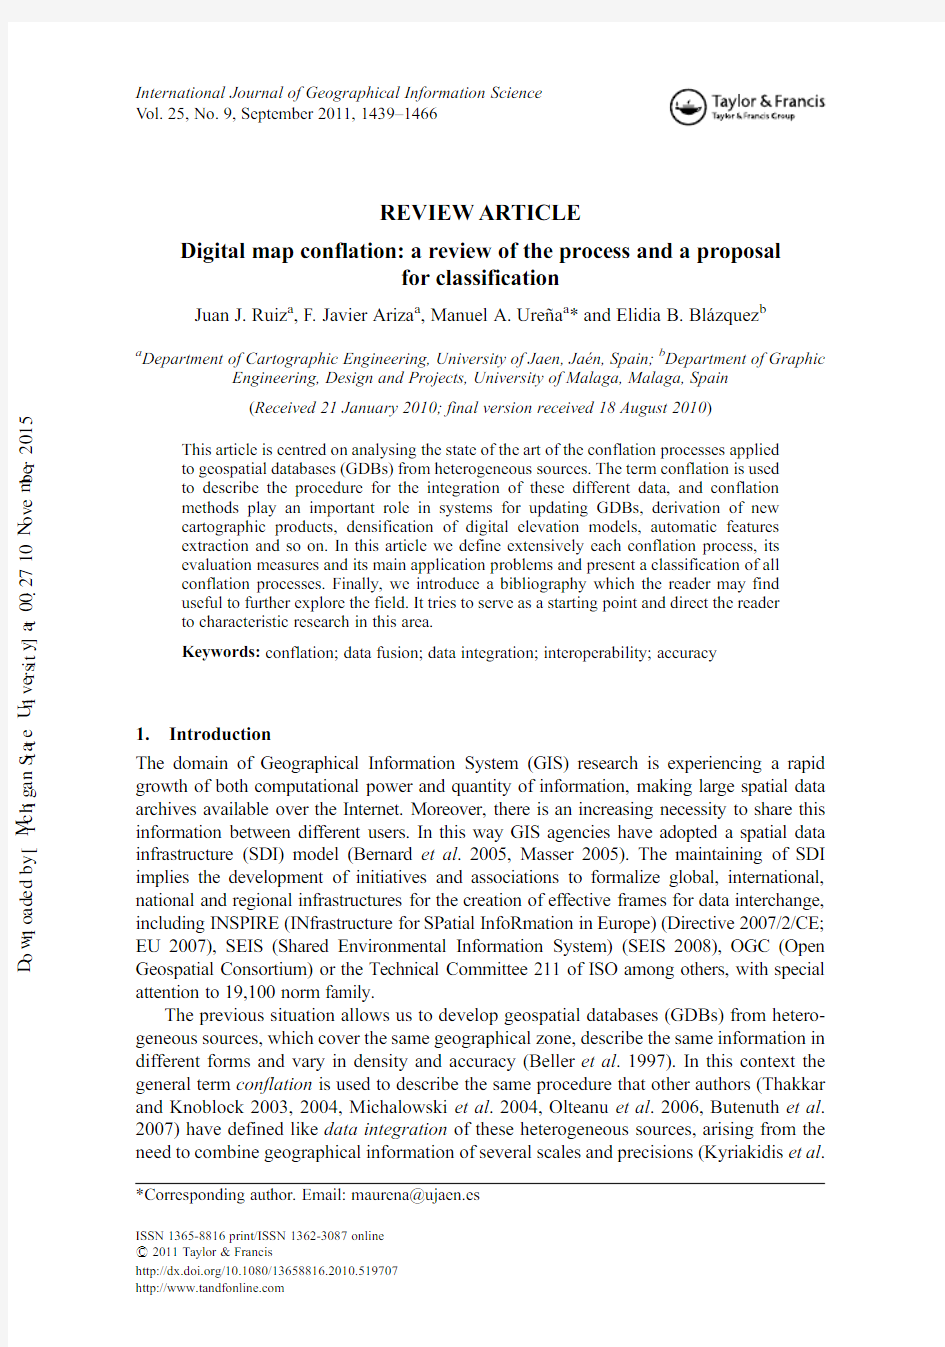 Digital map conflation  a review of the process and a proposal for classification